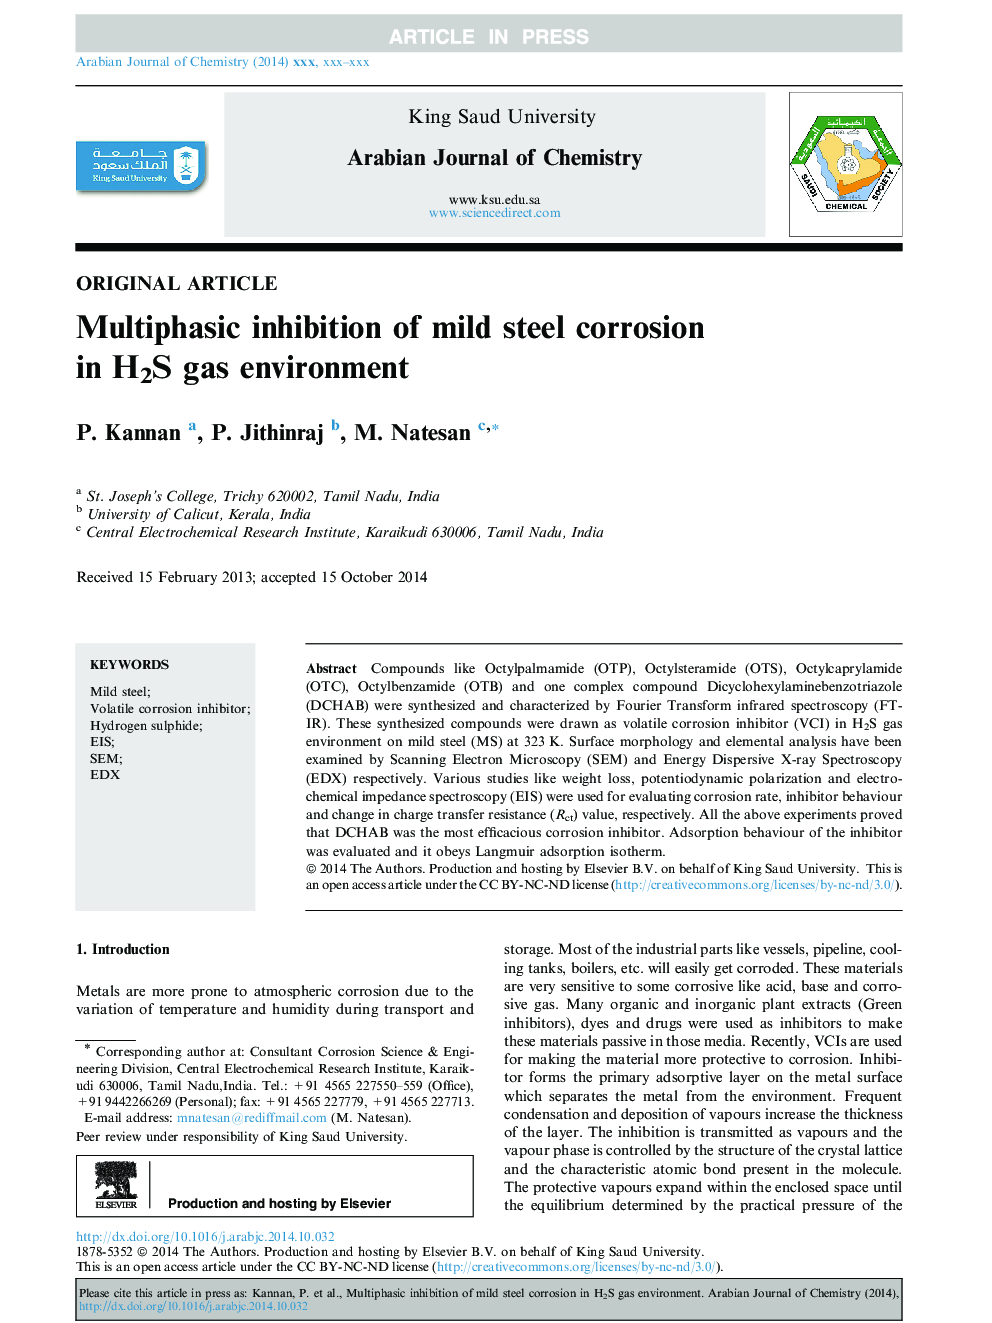 Multiphasic inhibition of mild steel corrosion in H2S gas environment